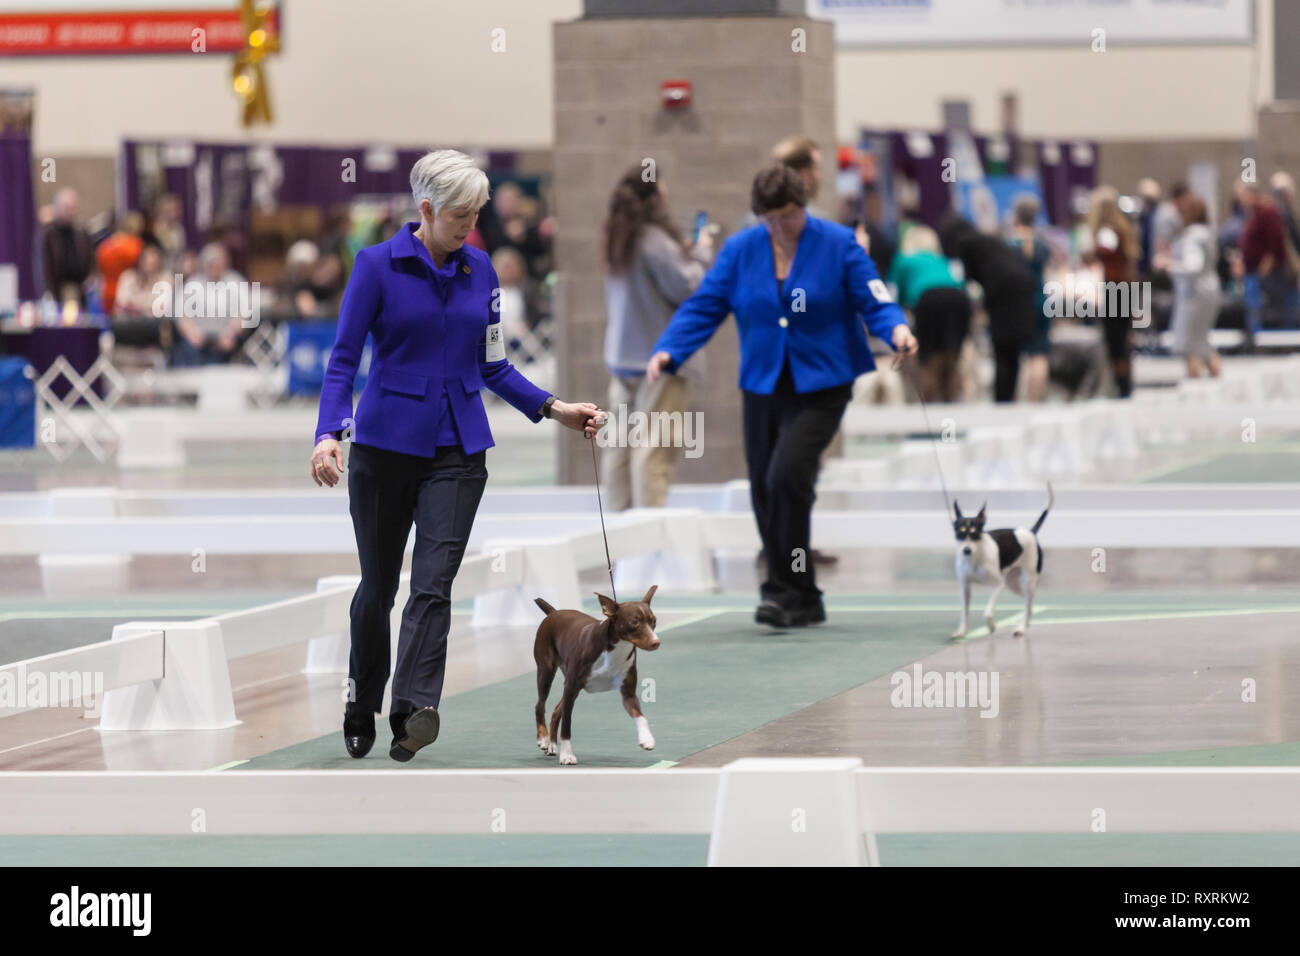 Seattle, USA. 09th Mar, 2019. Miniature Pinschers are walked in the ring at the 2019 Seattle Kennel Club Dog Show. Approximately 160 different breeds participate in the annual All-Breed dog show. Credit: Paul Christian Gordon/Alamy Live News Stock Photo